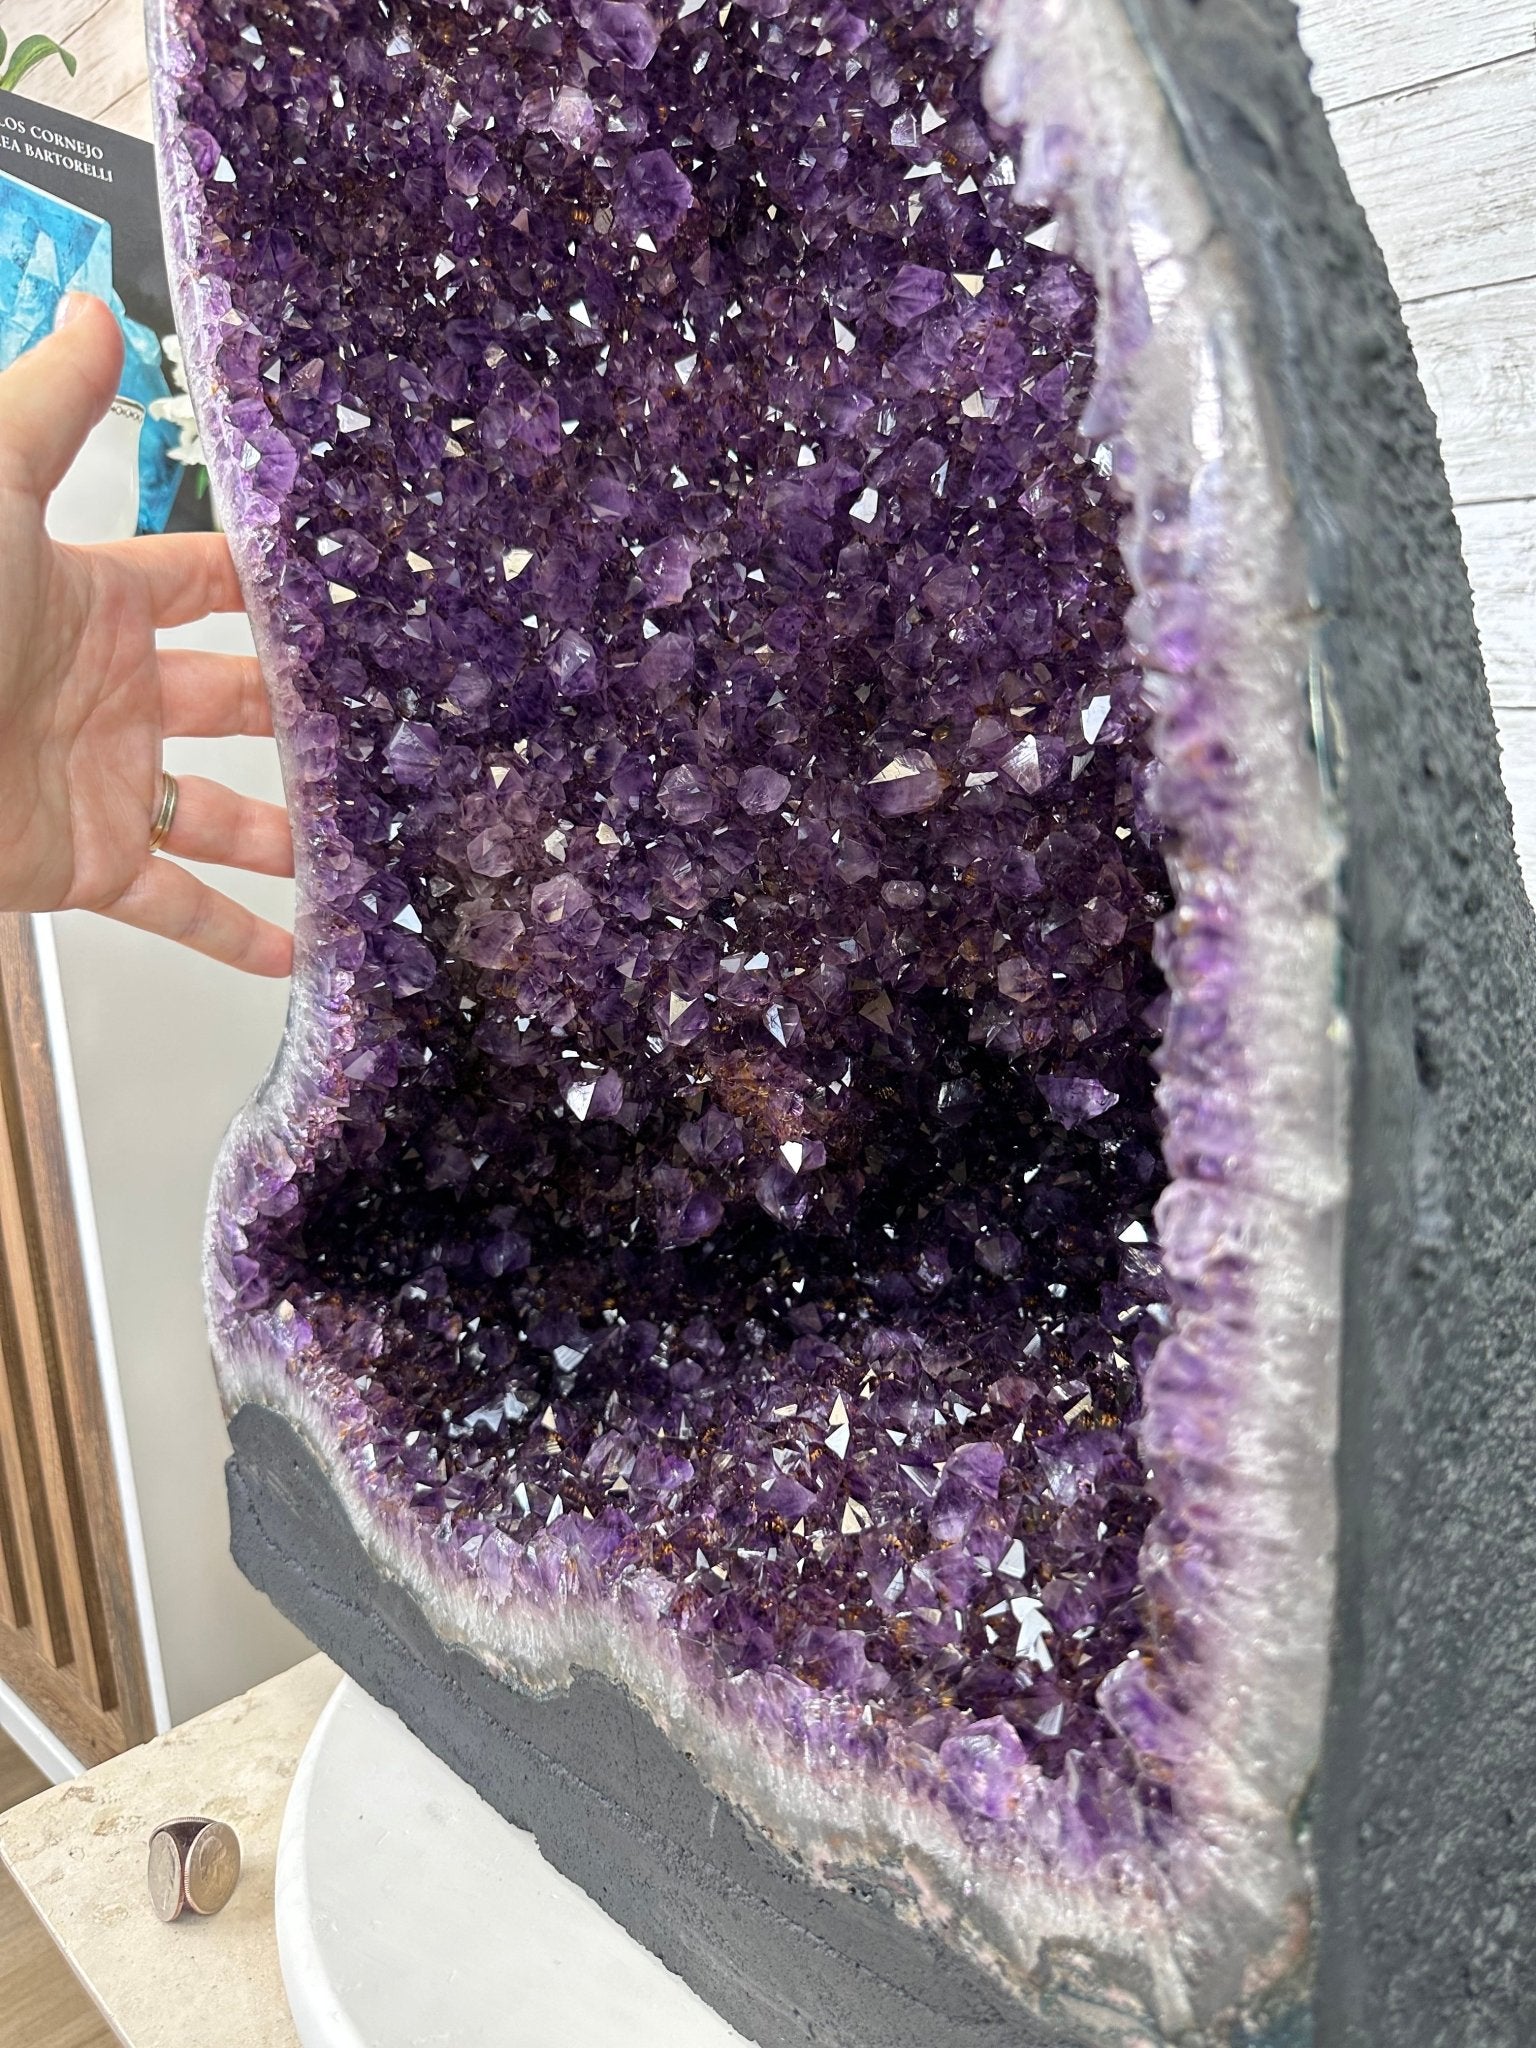 Super Quality Brazilian Amethyst Cathedral, 116.8 lbs & 27" Tall, Model #5601-1301 by Brazil Gems - Brazil GemsBrazil GemsSuper Quality Brazilian Amethyst Cathedral, 116.8 lbs & 27" Tall, Model #5601-1301 by Brazil GemsCathedrals5601-1301